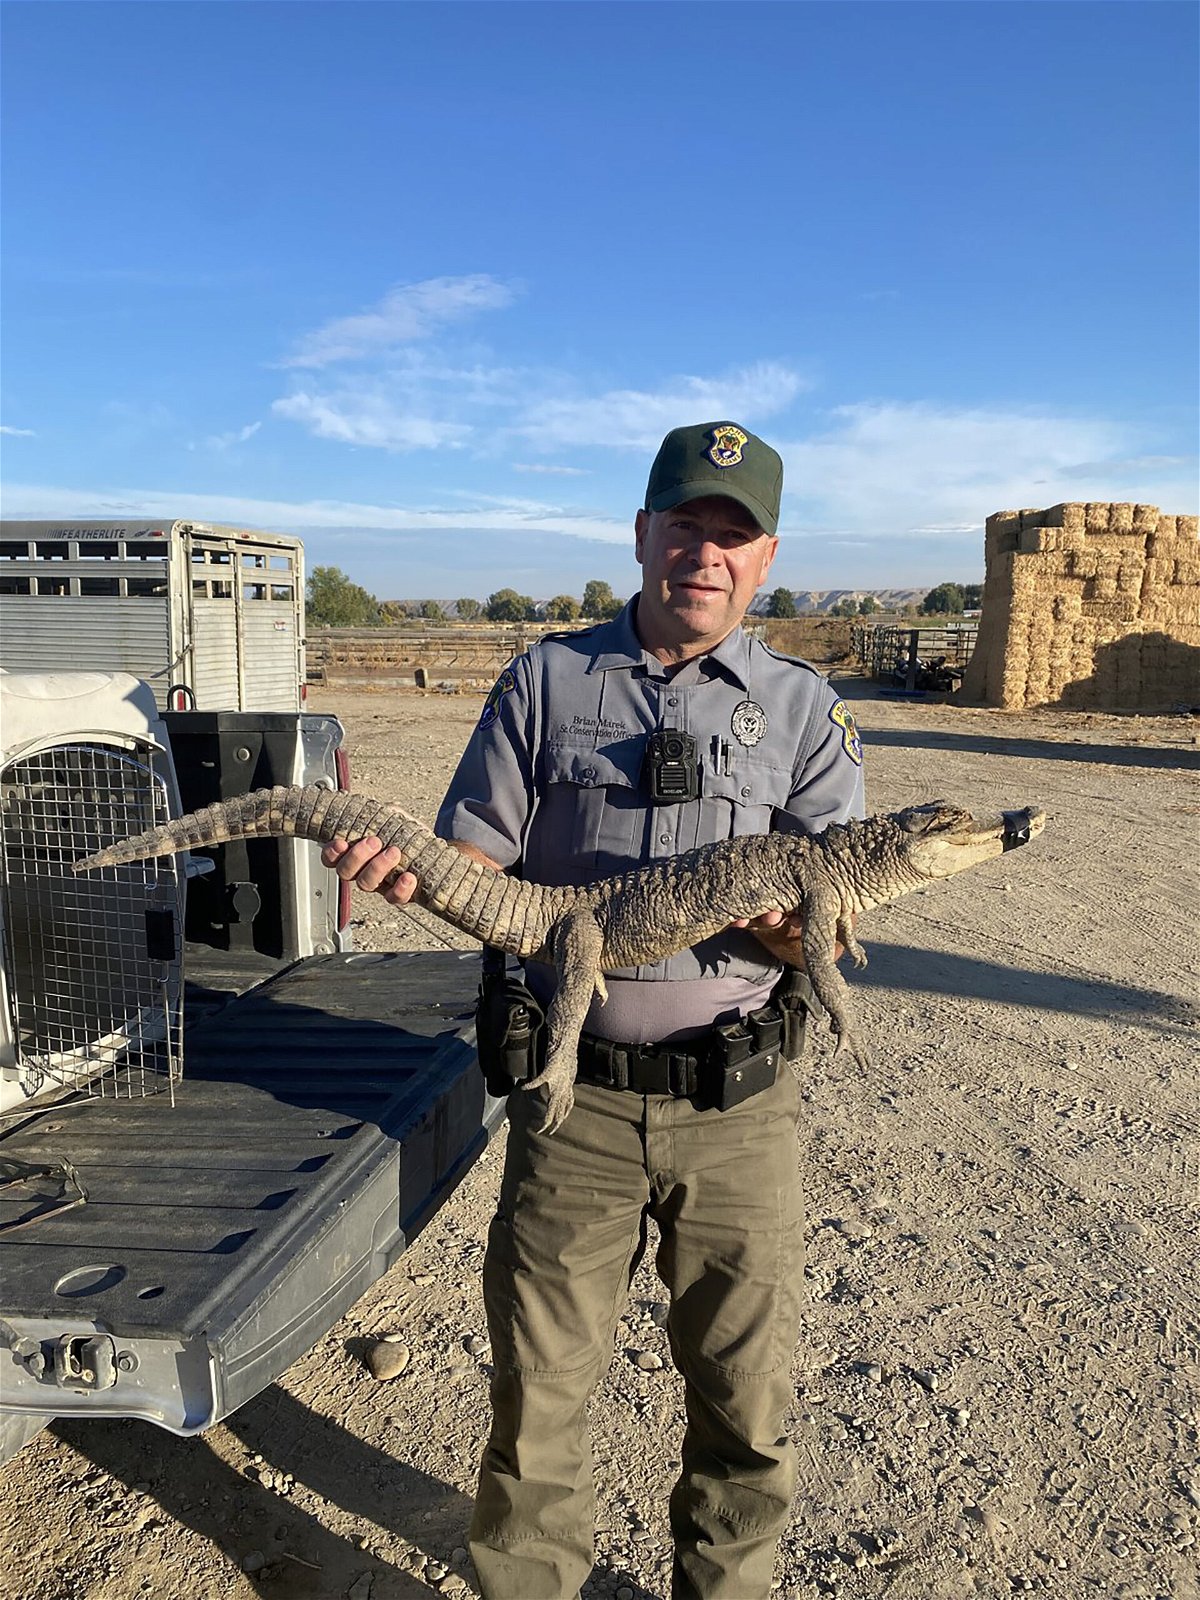 <i>Idaho Department of Fish and Game/Brian Marek</i><br/>The Idaho Department of Fish and Game released this photo of the 3.5 foot long alligator found in a rural community.